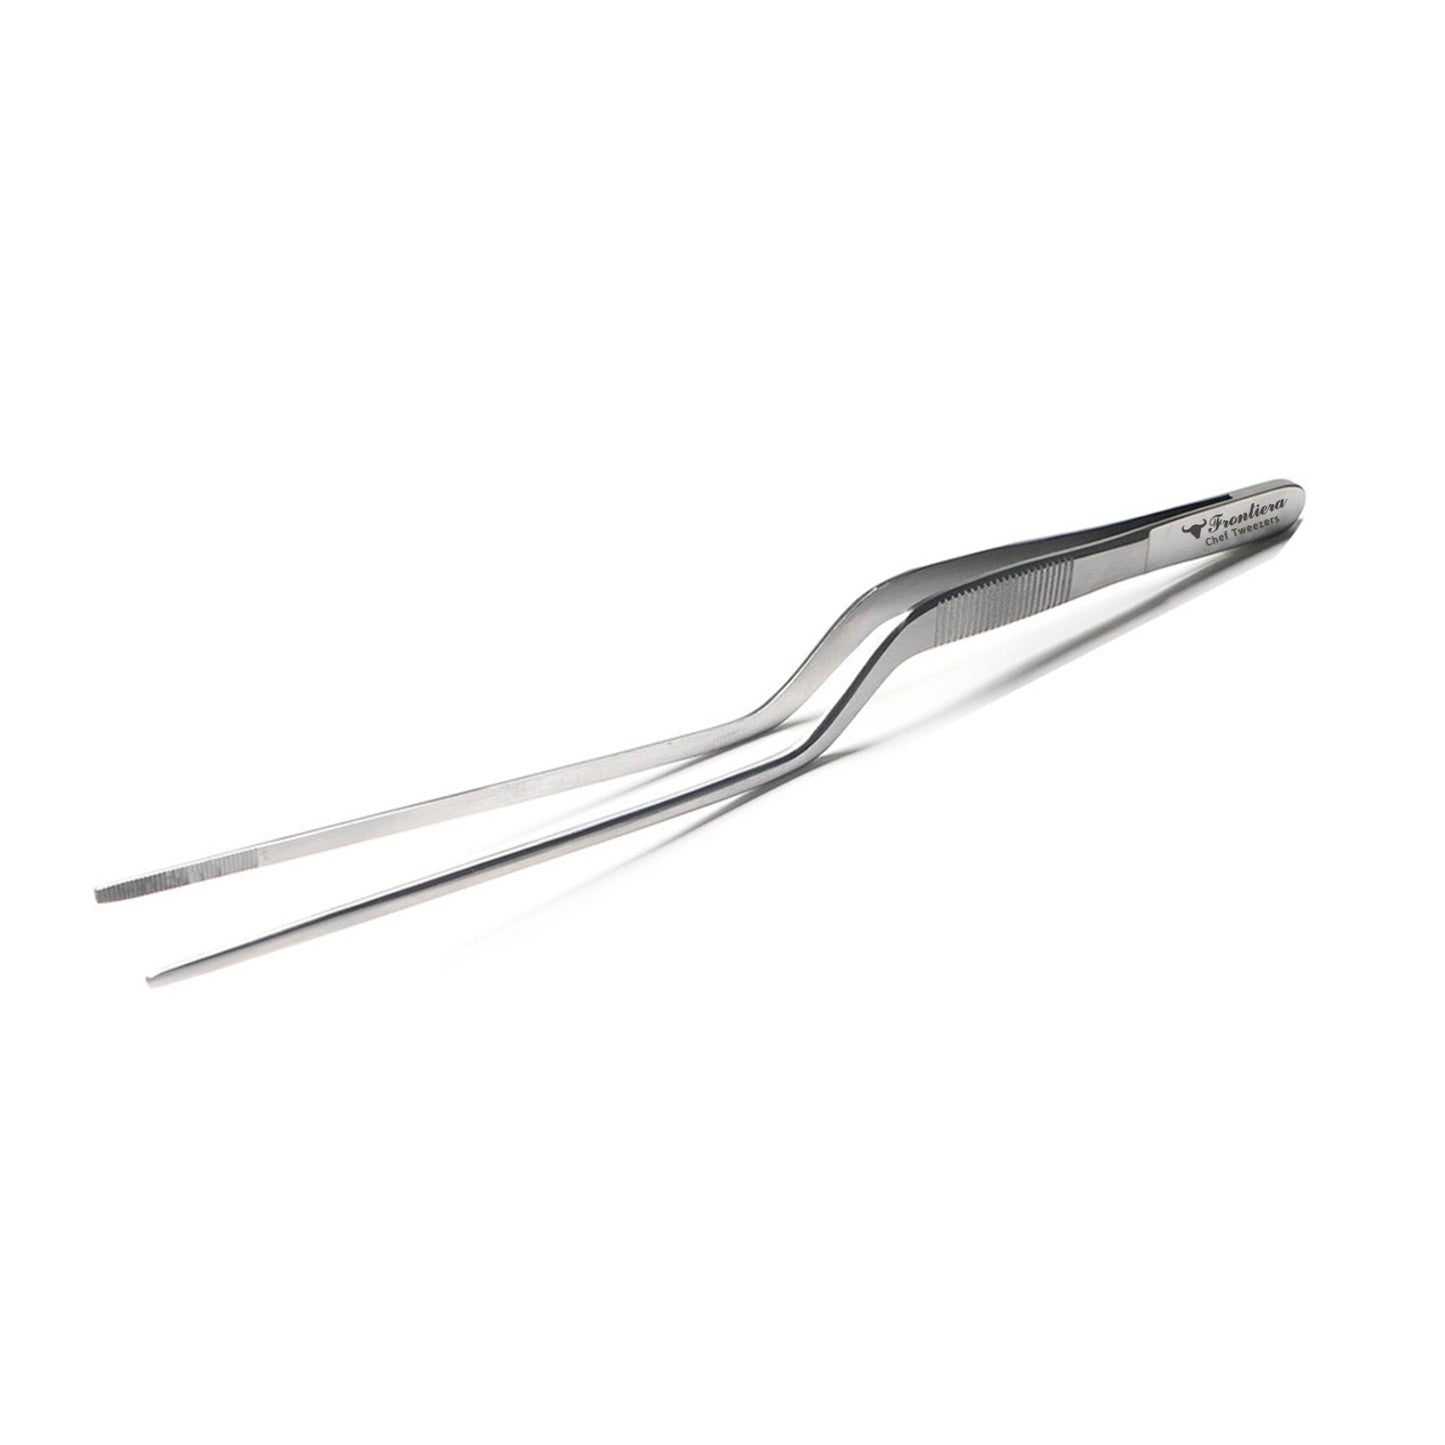 High Precision Offset Chef's Tweezers (20cm/7.87") GREY + Custome Engraving (Optional)